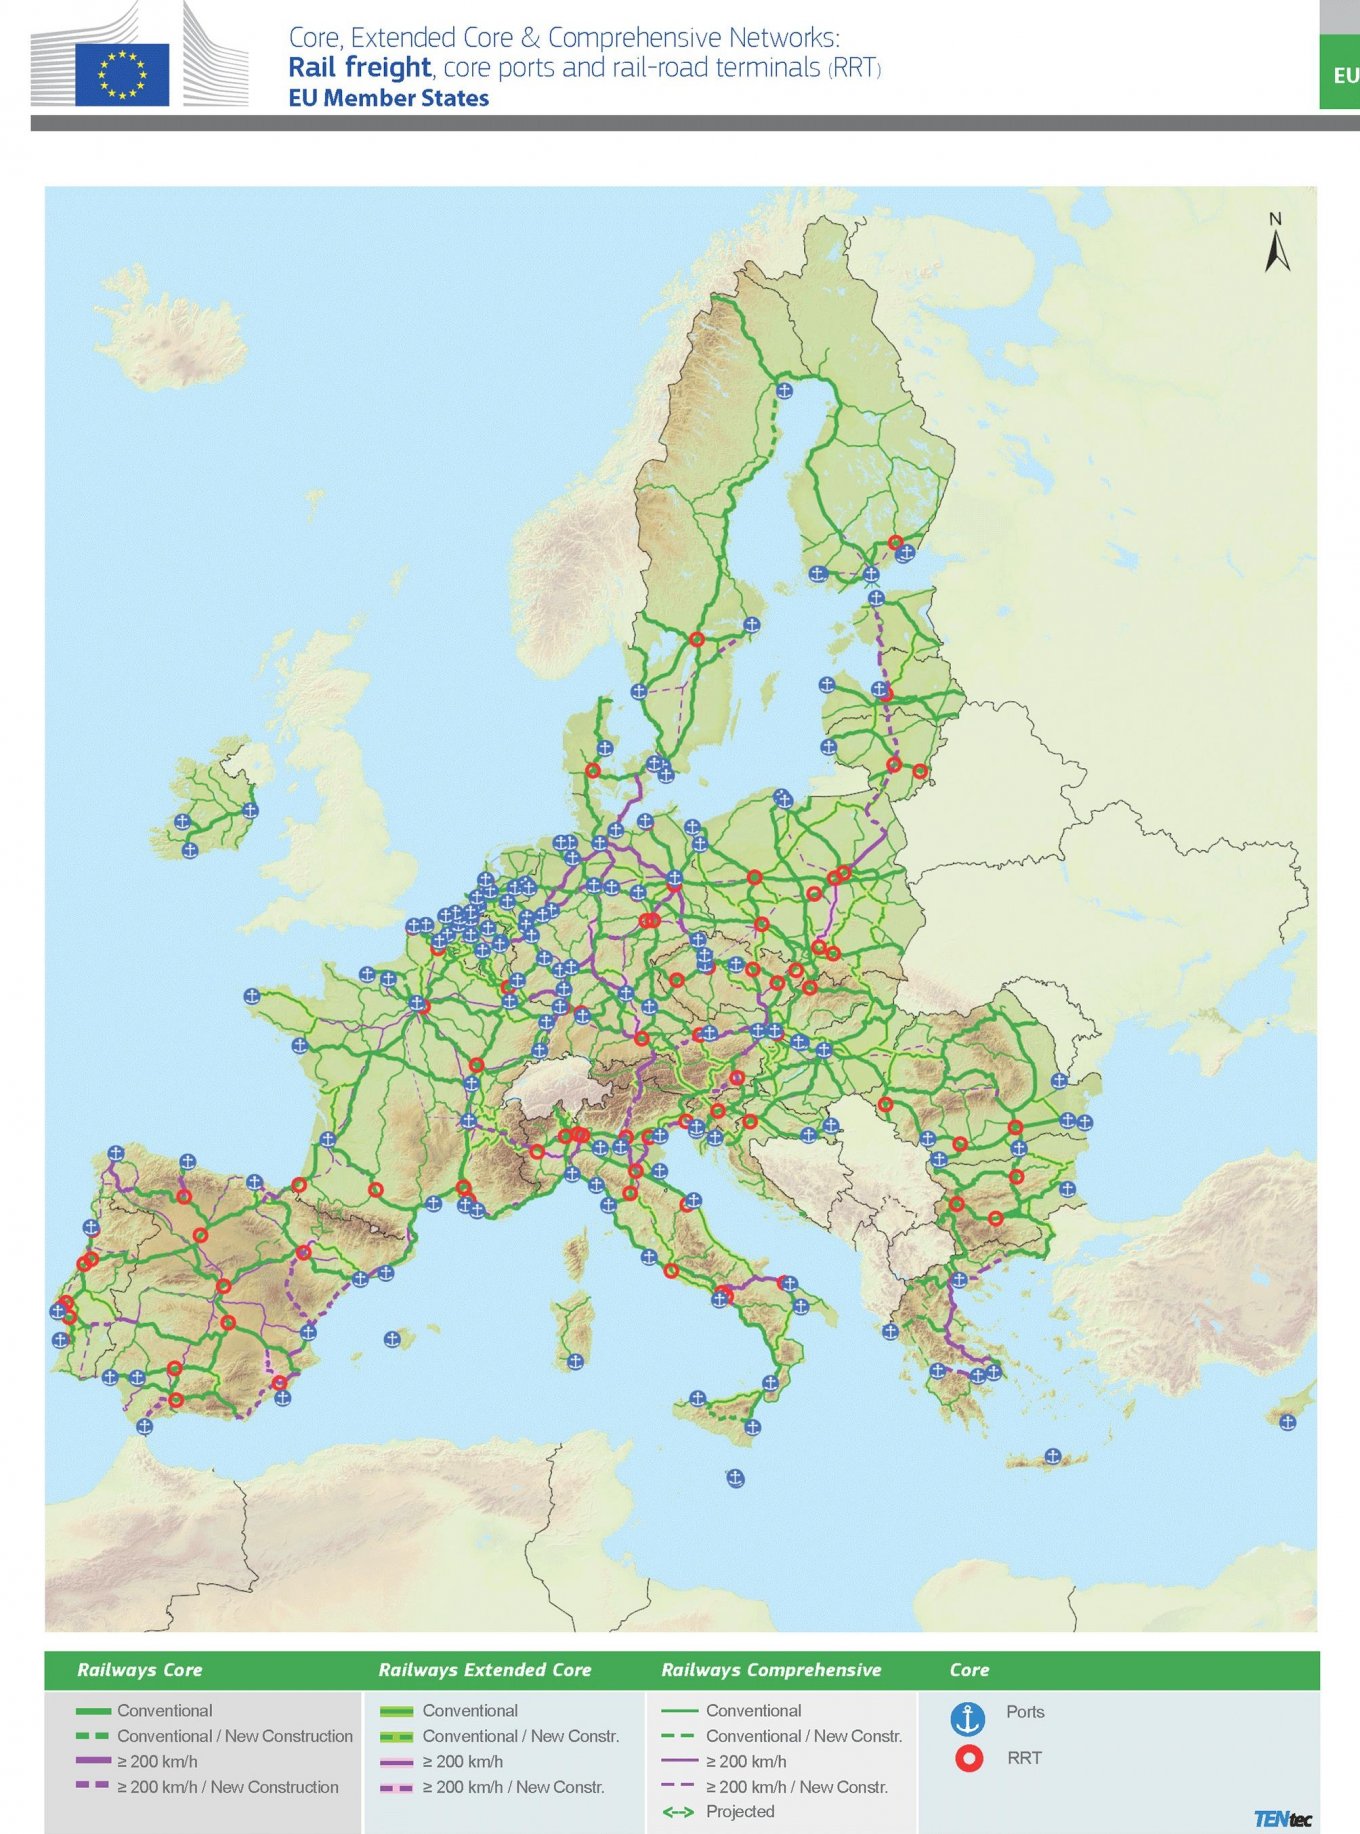 Road network of the EU (of the Trans-European Transport Network) as of 2021